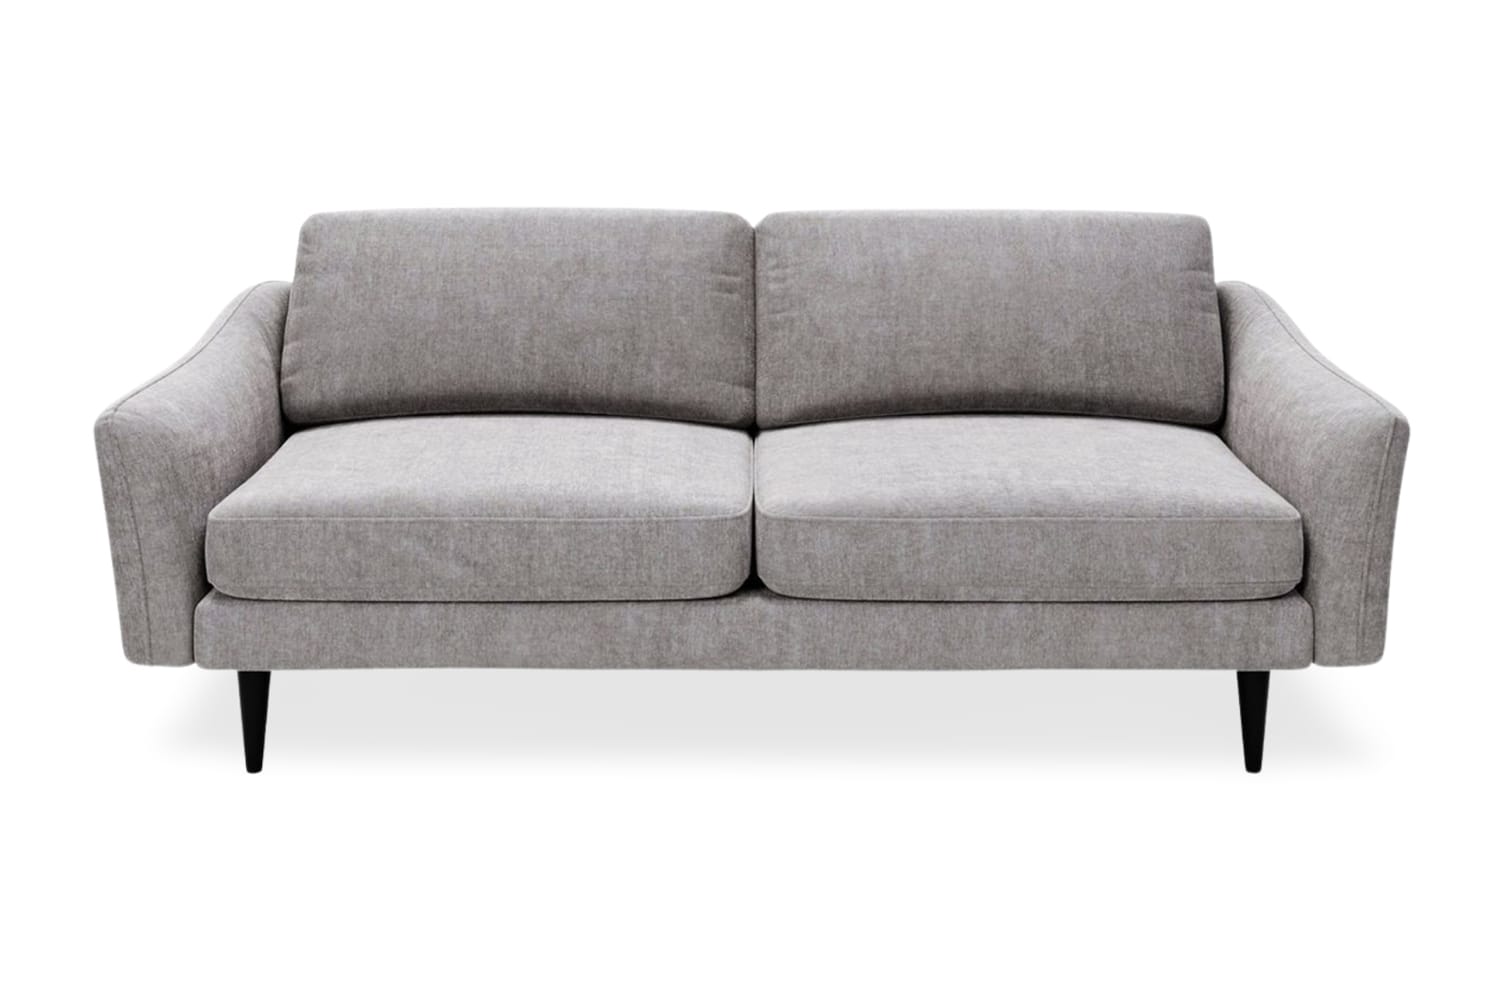 SNUG | The Rebel 3 Seater Sofa in Mid Grey variant_40414890229808